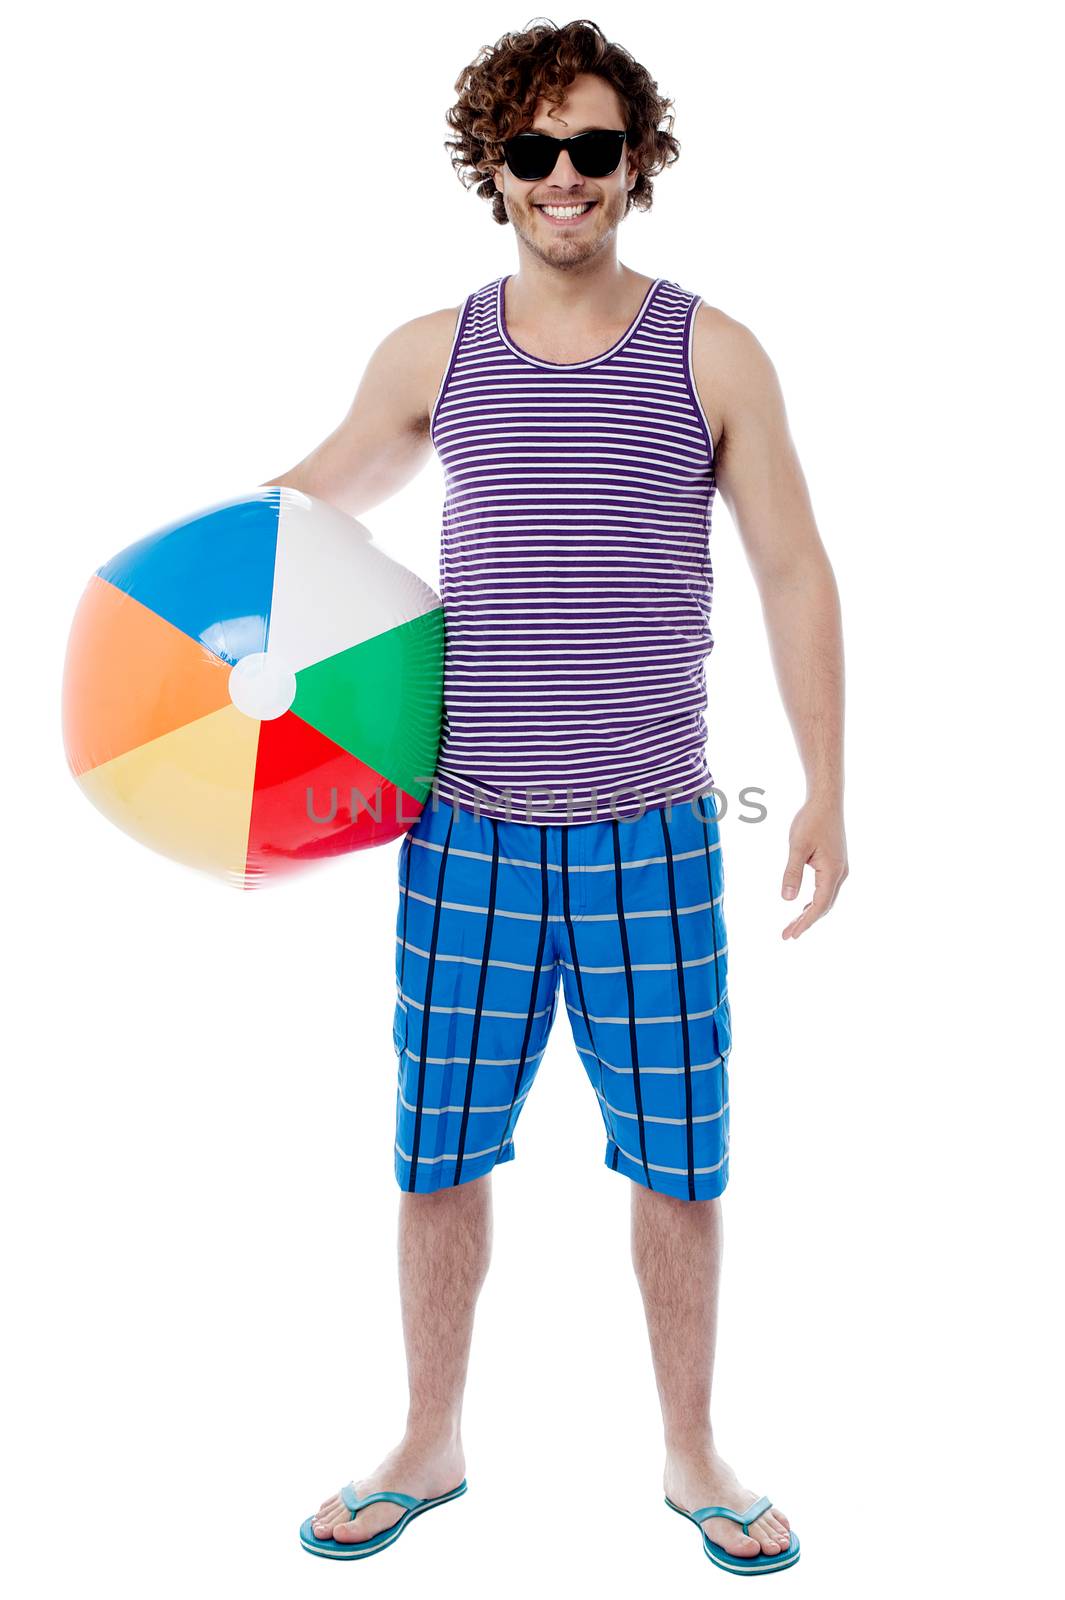 Handsome young guy posing with beach ball